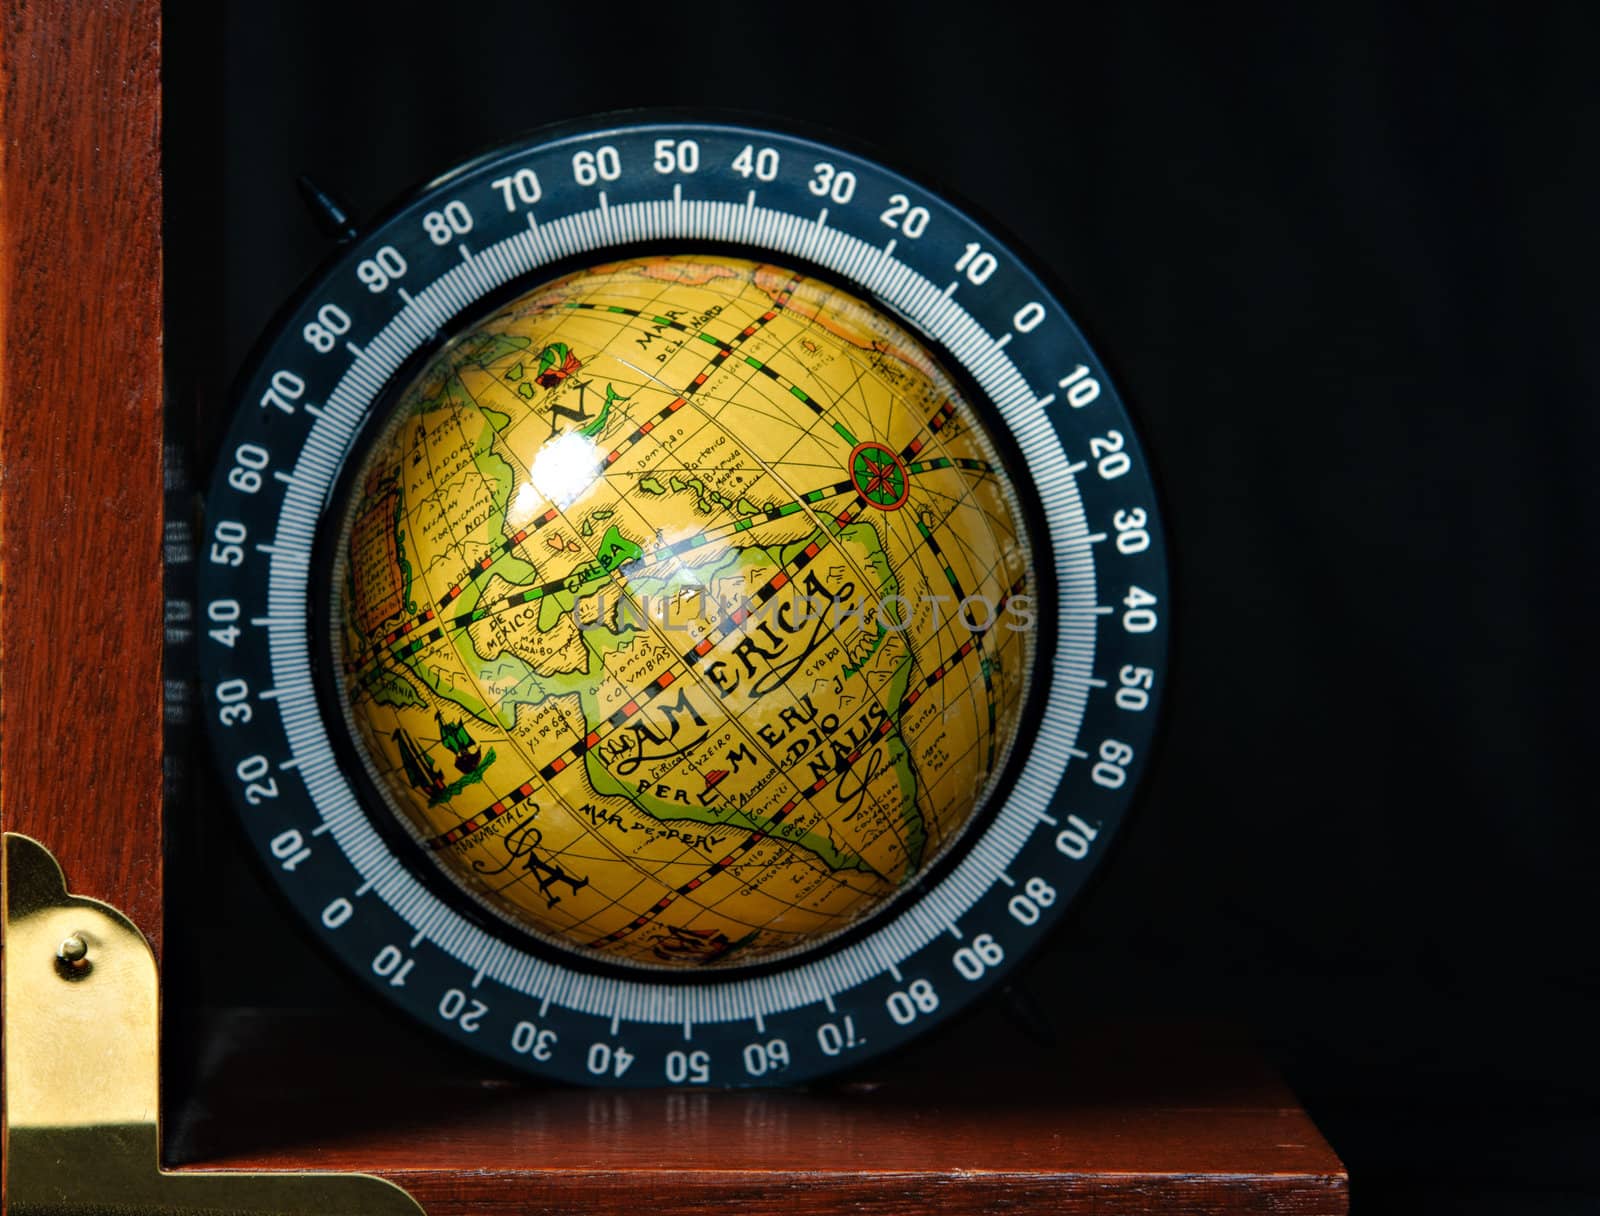 A bookend in the shape of a world globe, shot against a dark background